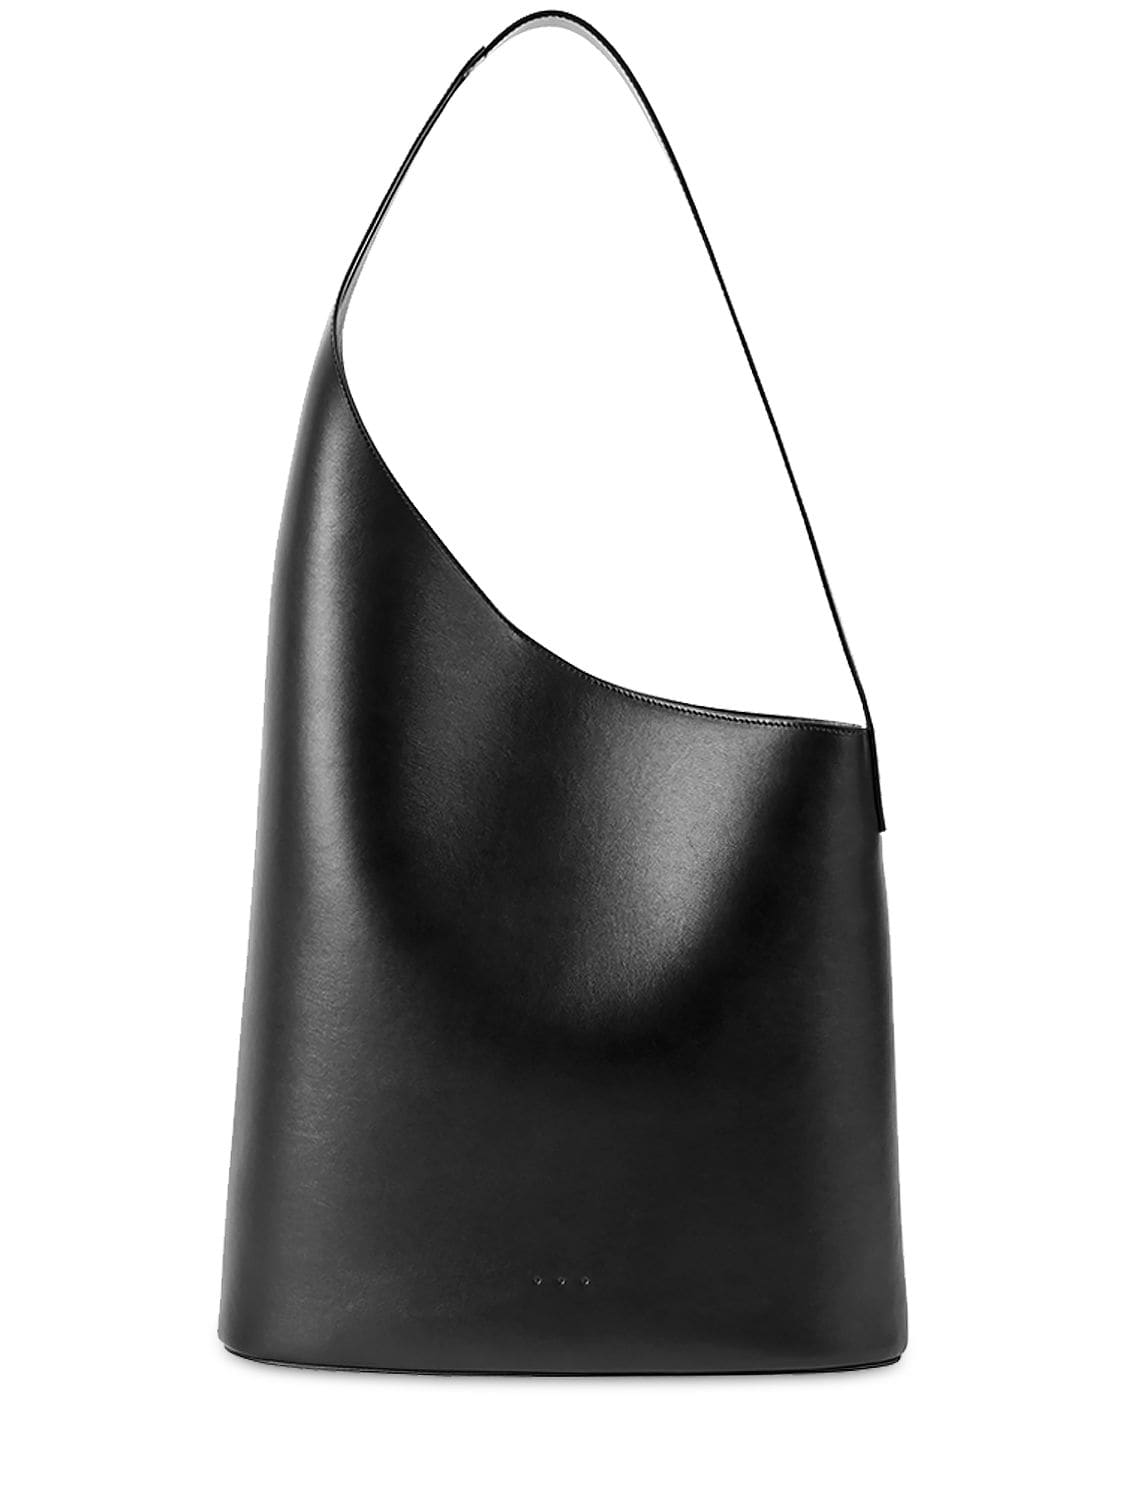 Image of Lune Tote Smooth Leather Bag